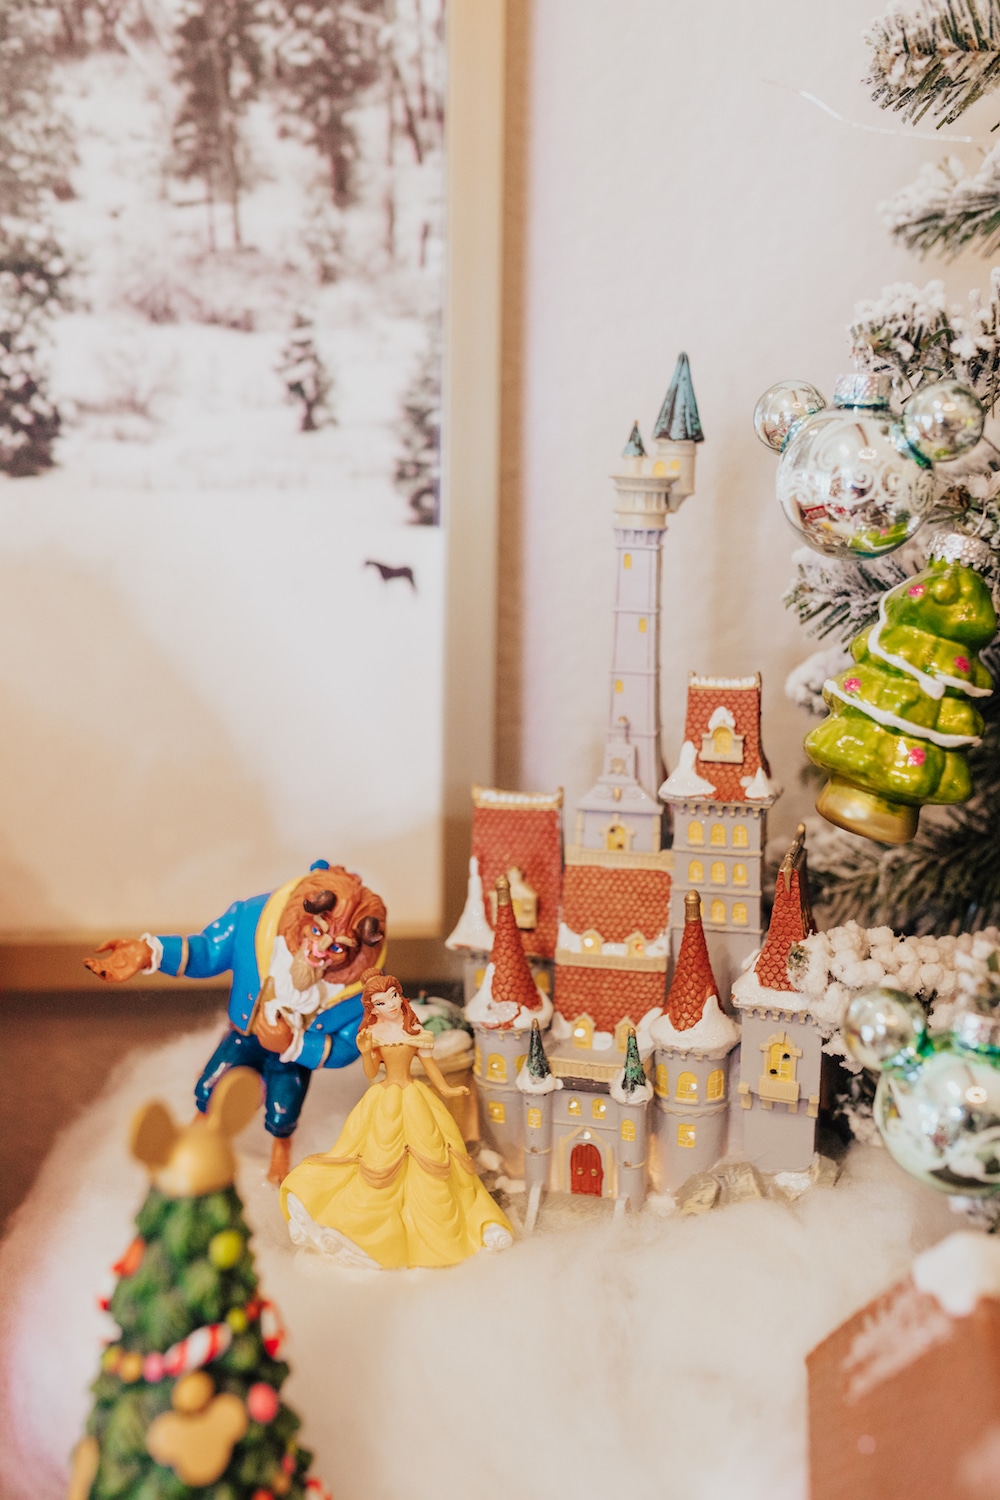 how to create a disney mickey's christmas village display on a table - colorful christmas decor - department 56 - beauty and the beast